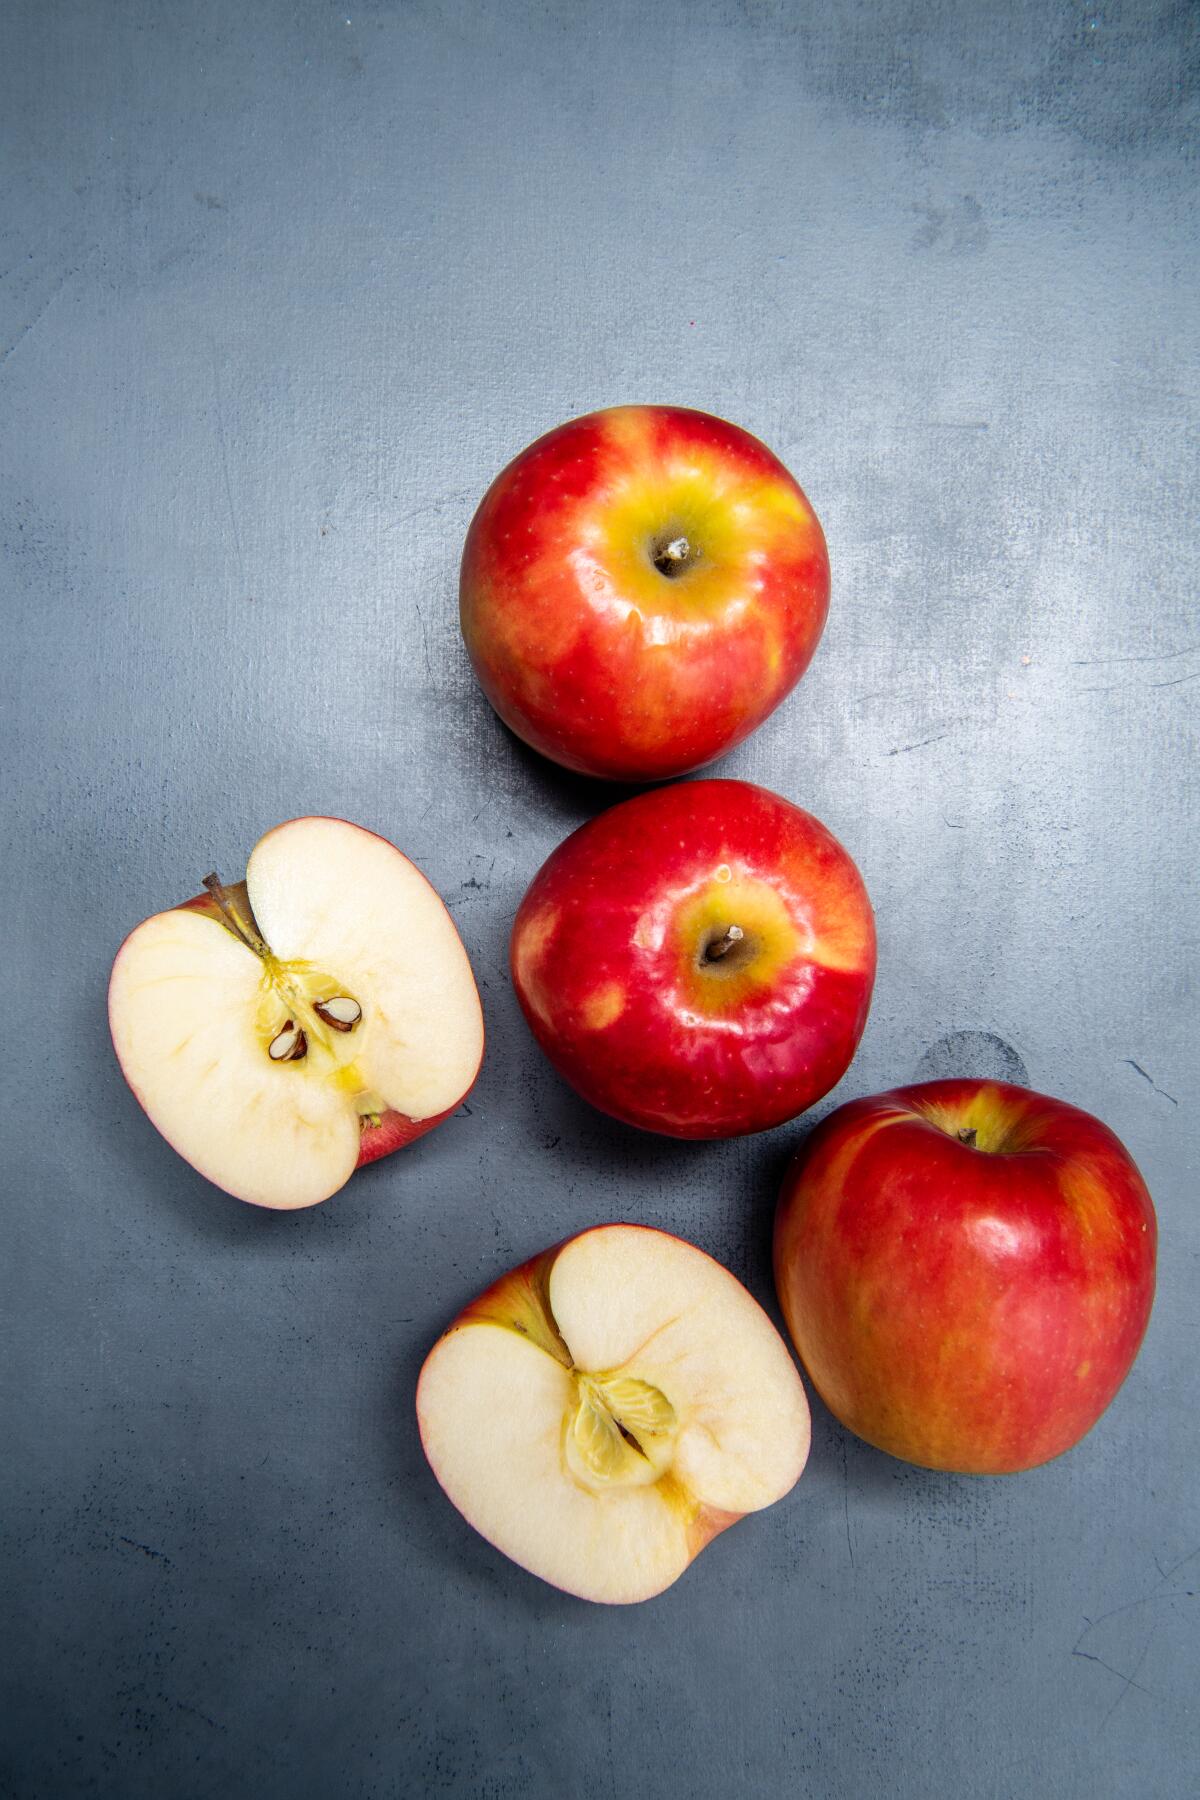 Skip the pie: Sweet-tart farmers market apples are perfect now for eating raw. Drop styling by Nidia Cueva.